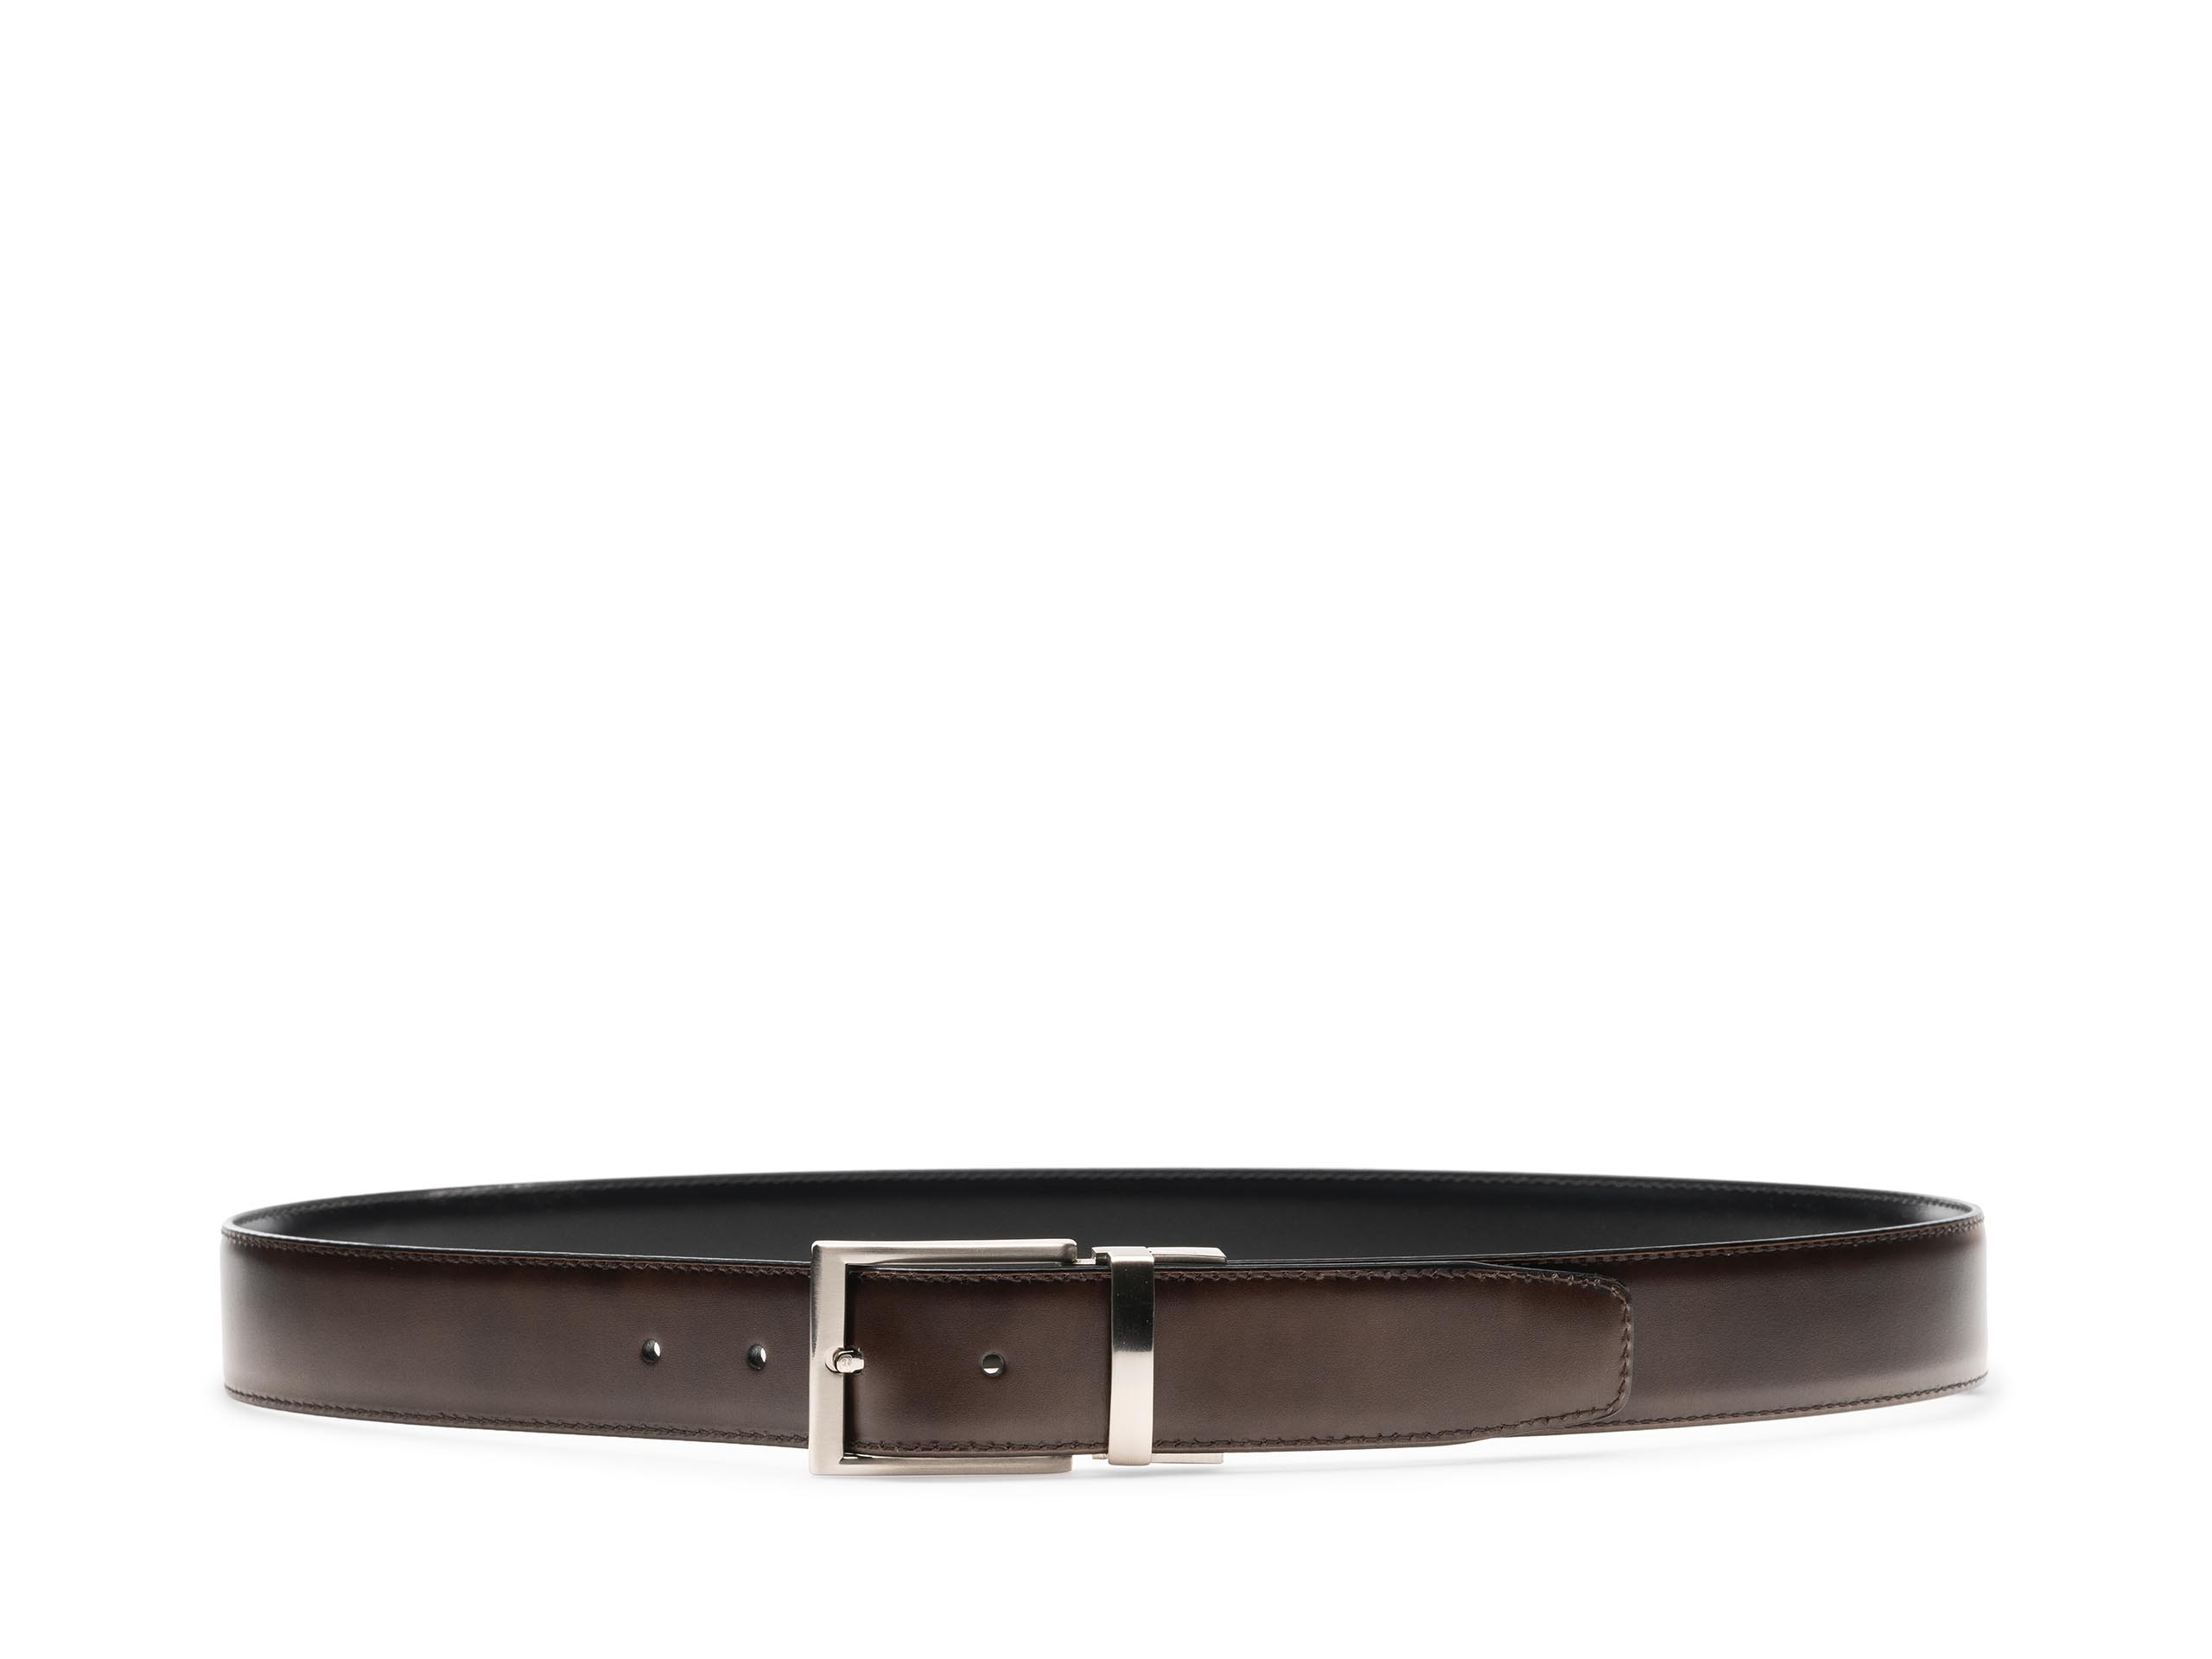 The Brown Side of the Reversible Lados Belt